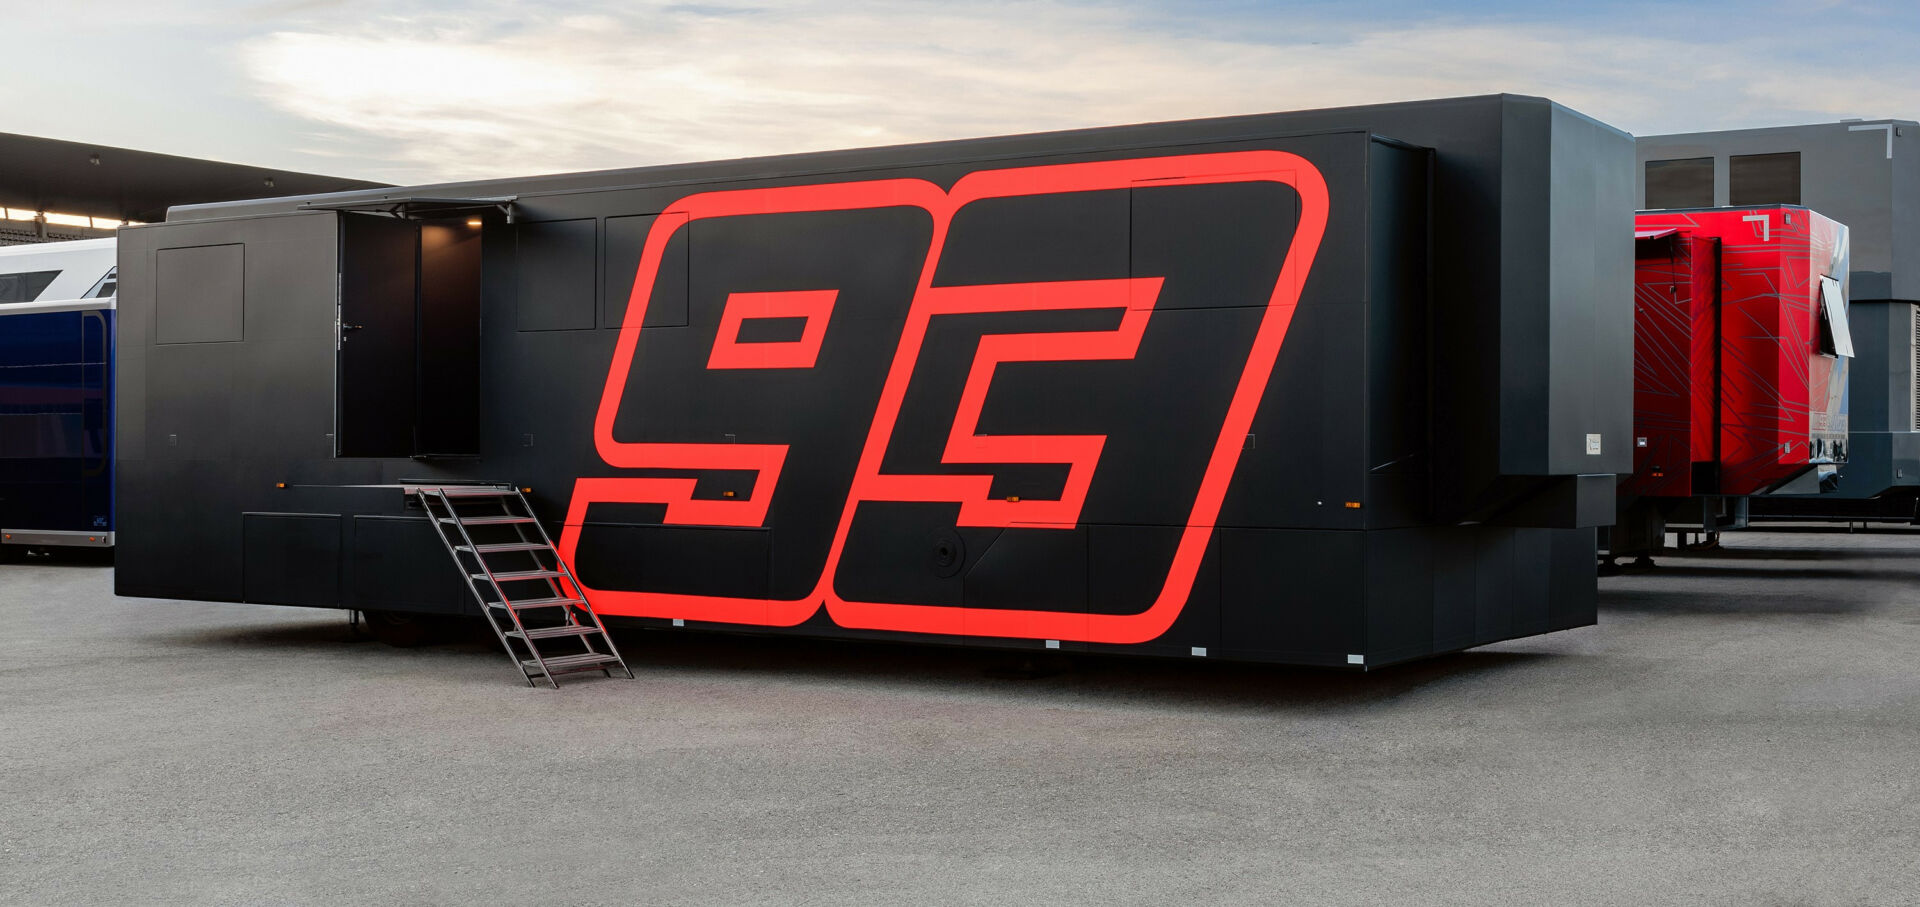 Two lucky fans will get to be Marc Marquez's overnight guests in a specially built trailer in the paddock during the MotoGP event weekend at Catalunya. Photo by David Vilanova, courtesy Airbnb.